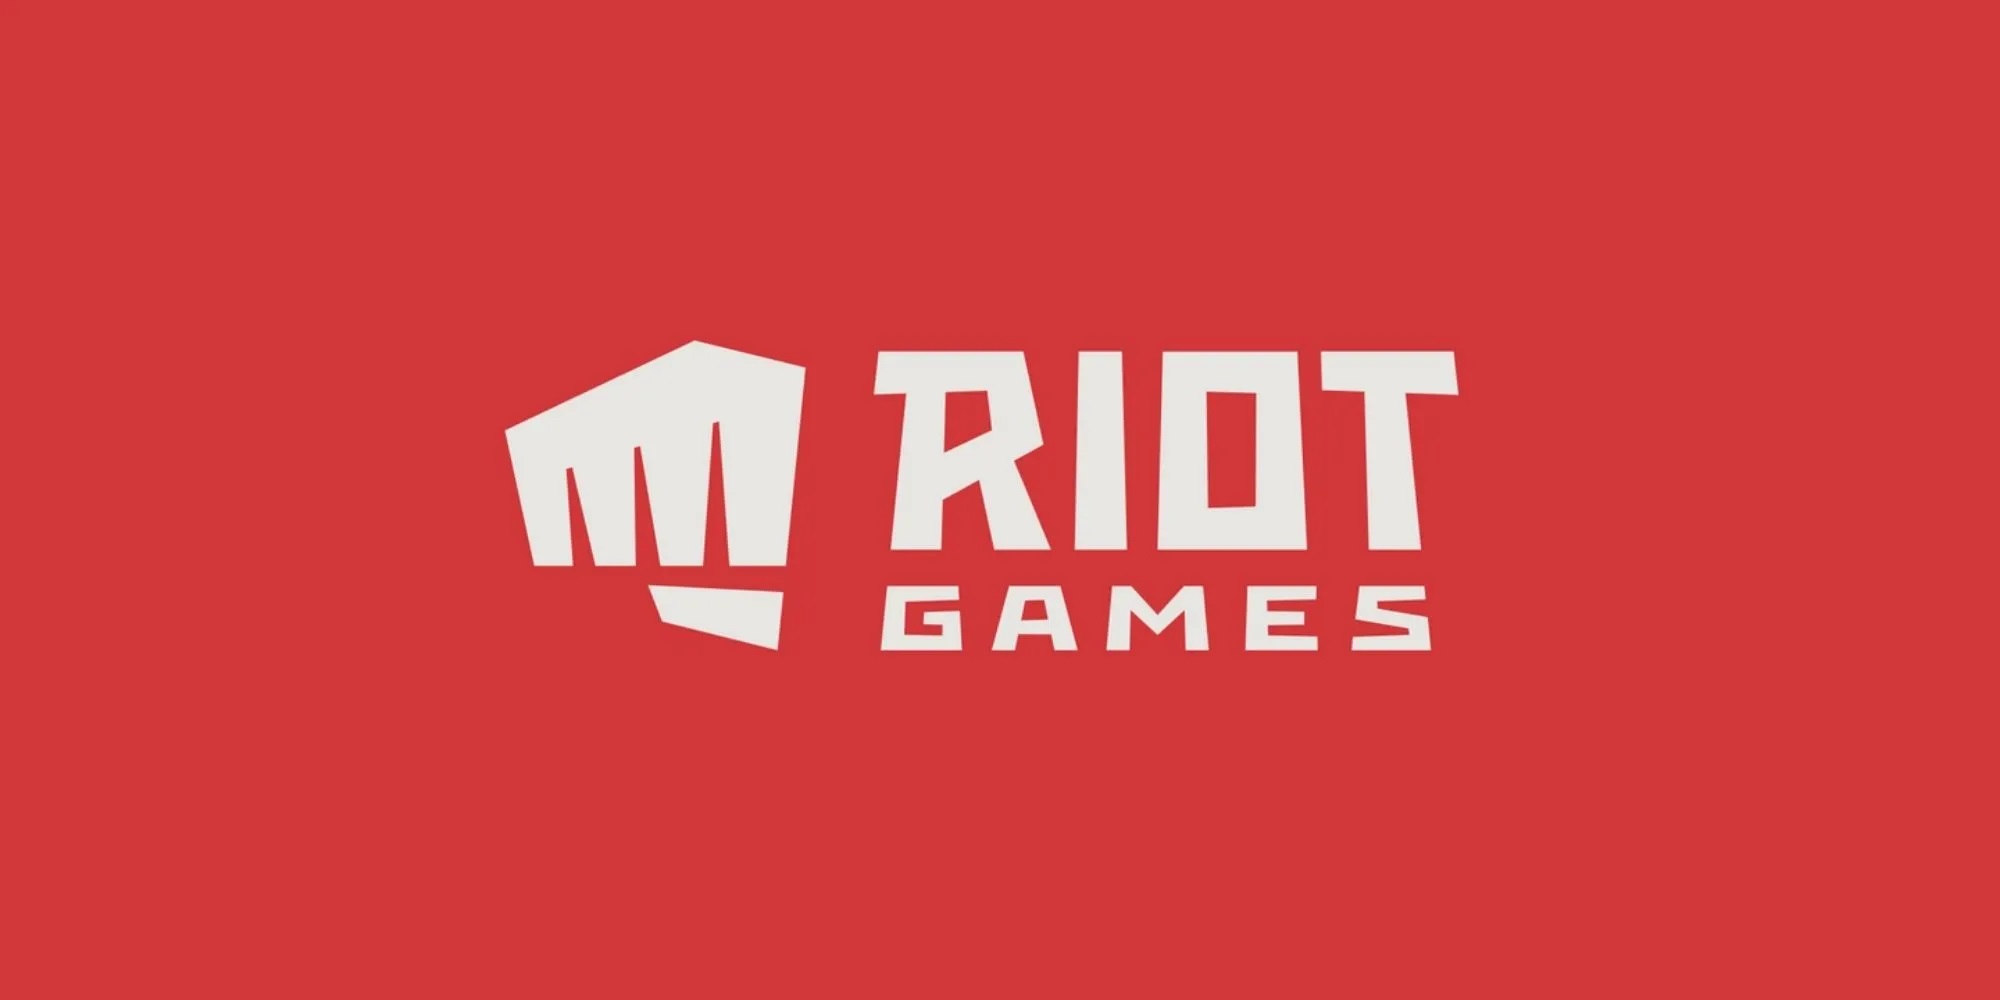 Riot games patents team making system